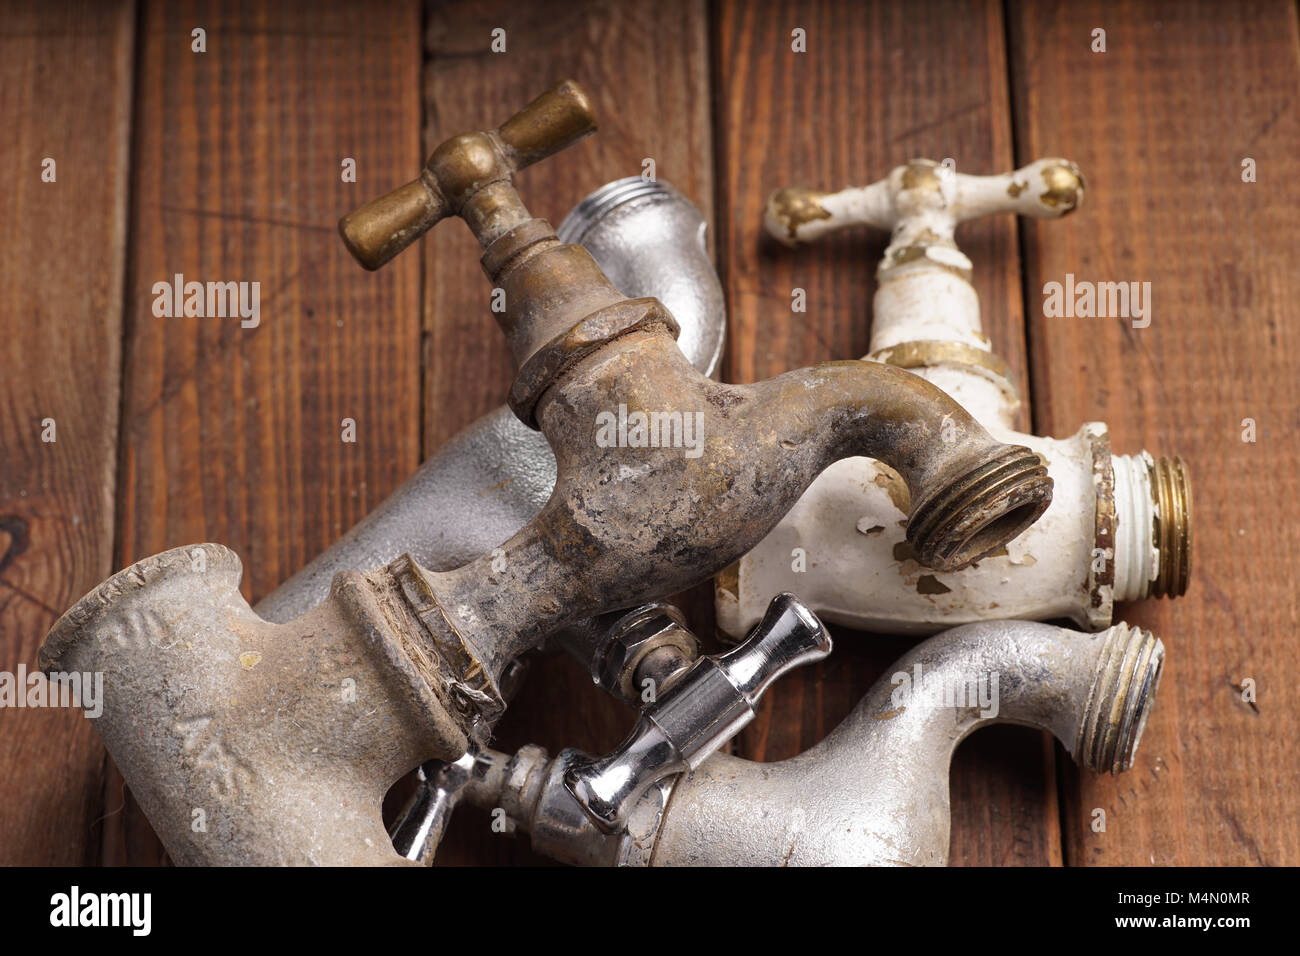 Plumber Tool Faucet For House Repair Lying On Wooden Background